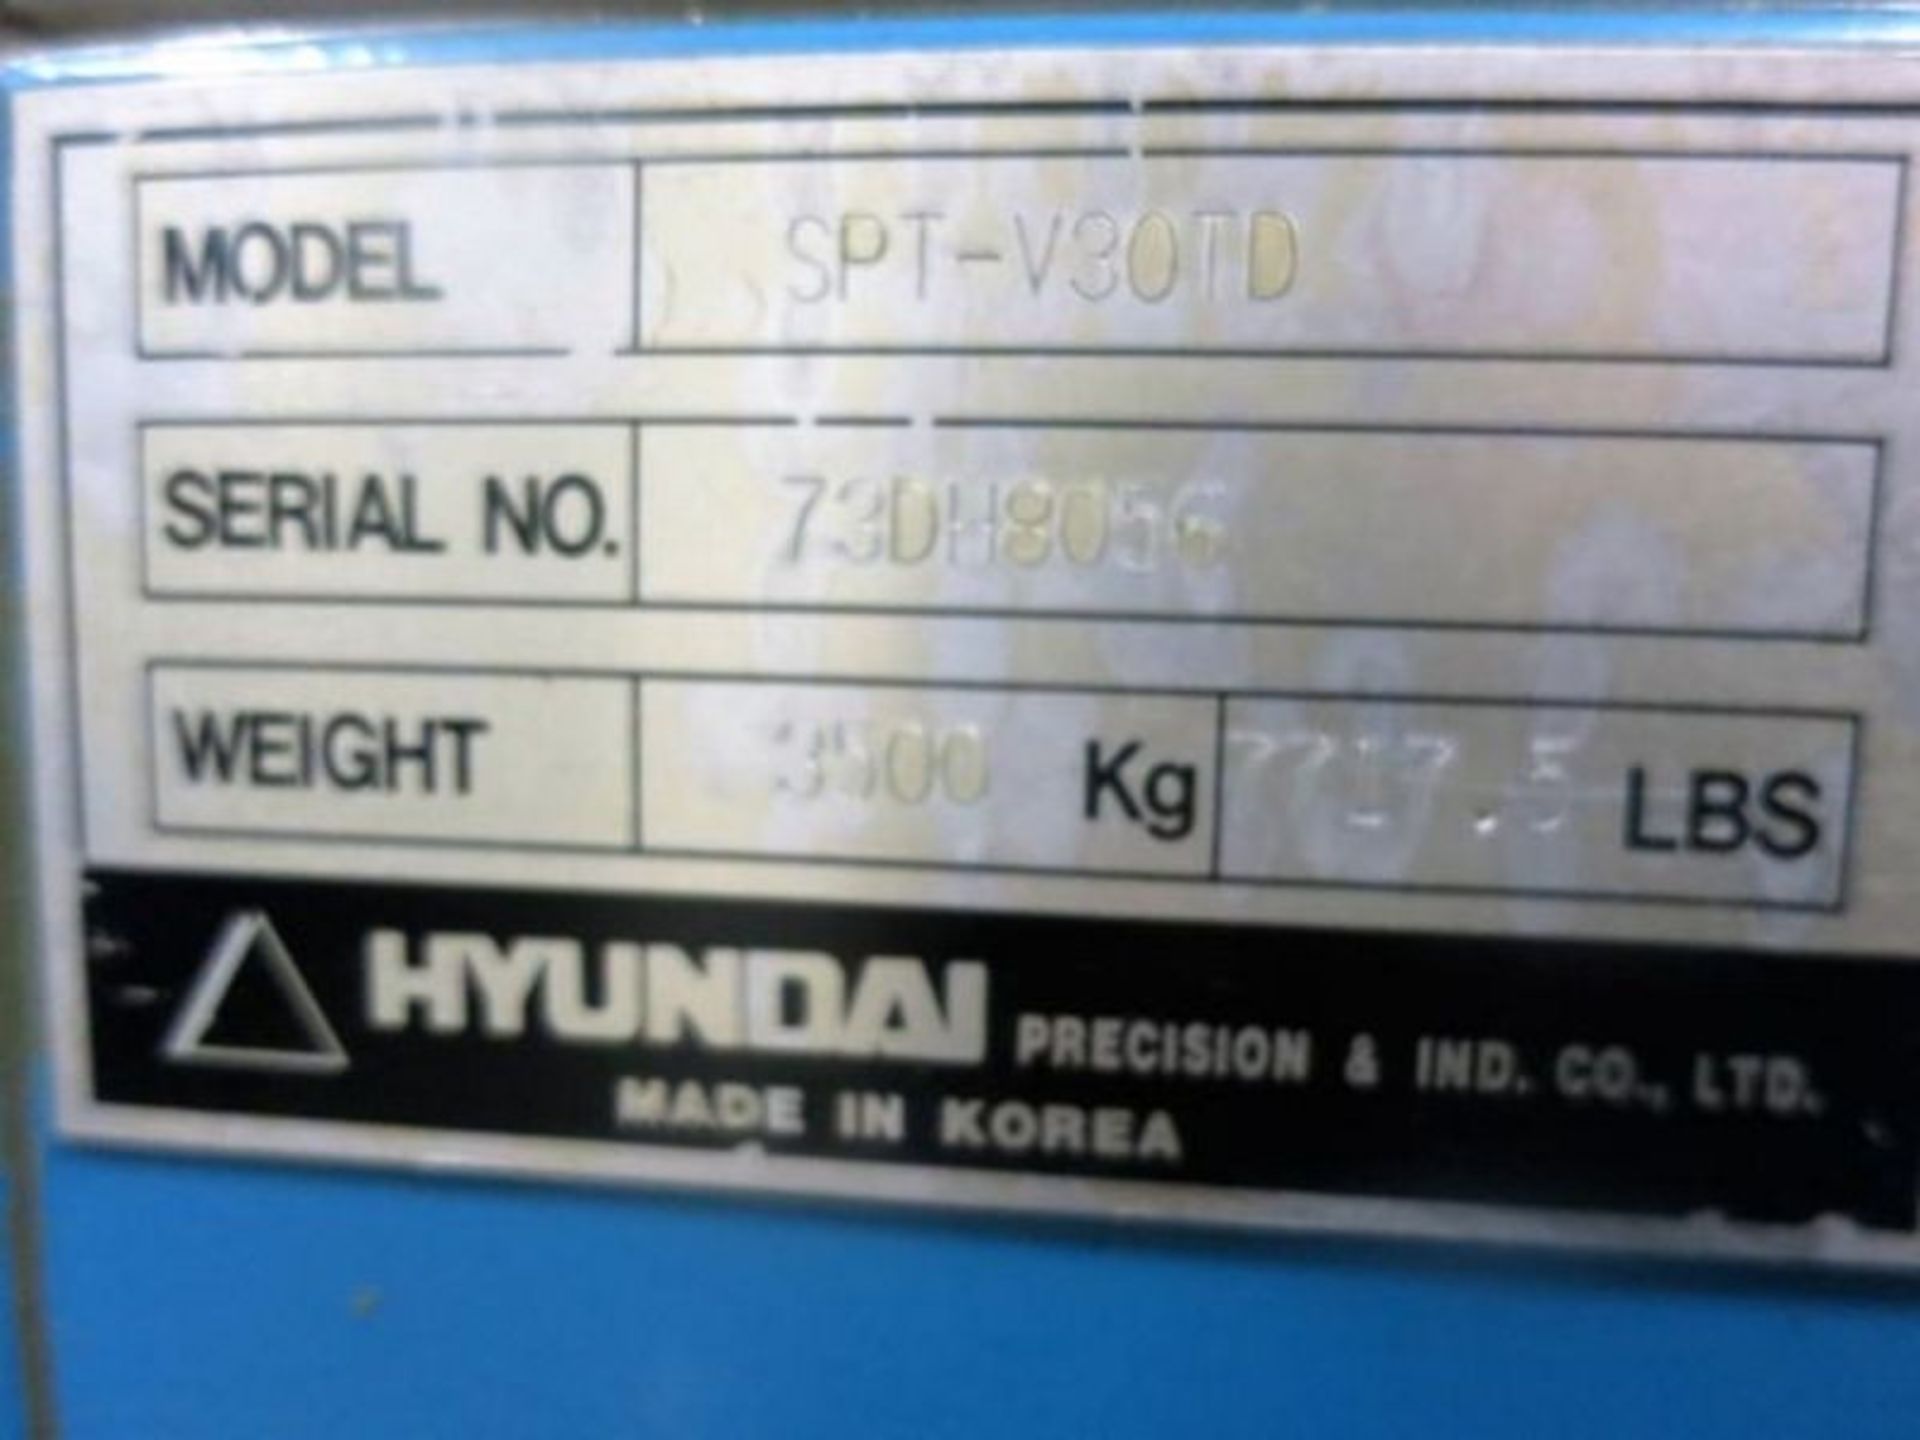 HYUNDAI MODEL SPTV30TD CNC TAPMILL CENTER WITH PALLET CHANGER, S/N 73H8056, NEW 1999 Table size 35. - Image 9 of 10